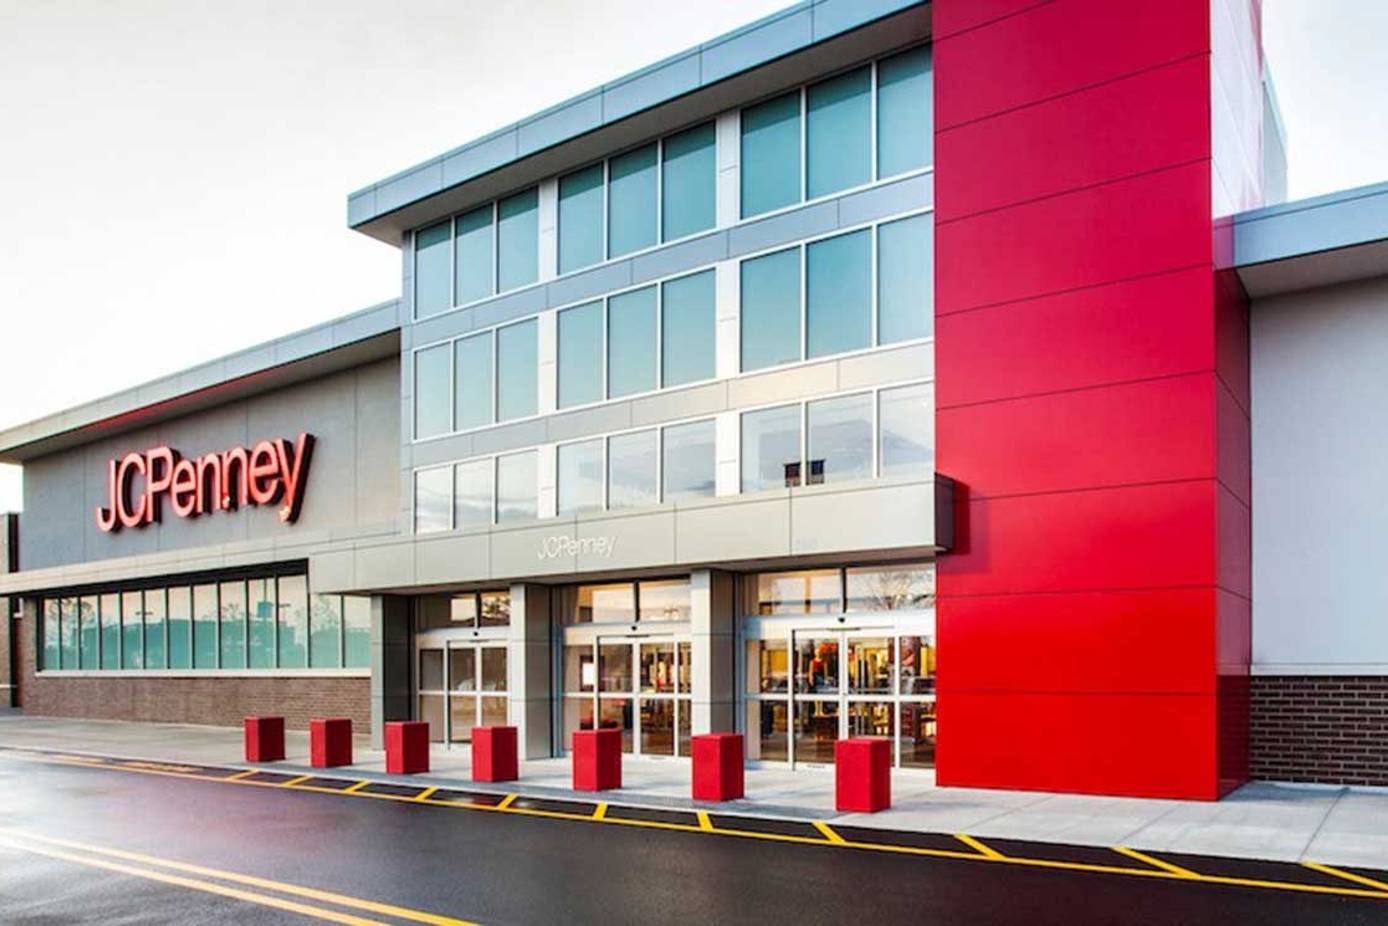 JCPenney to close 242 locations